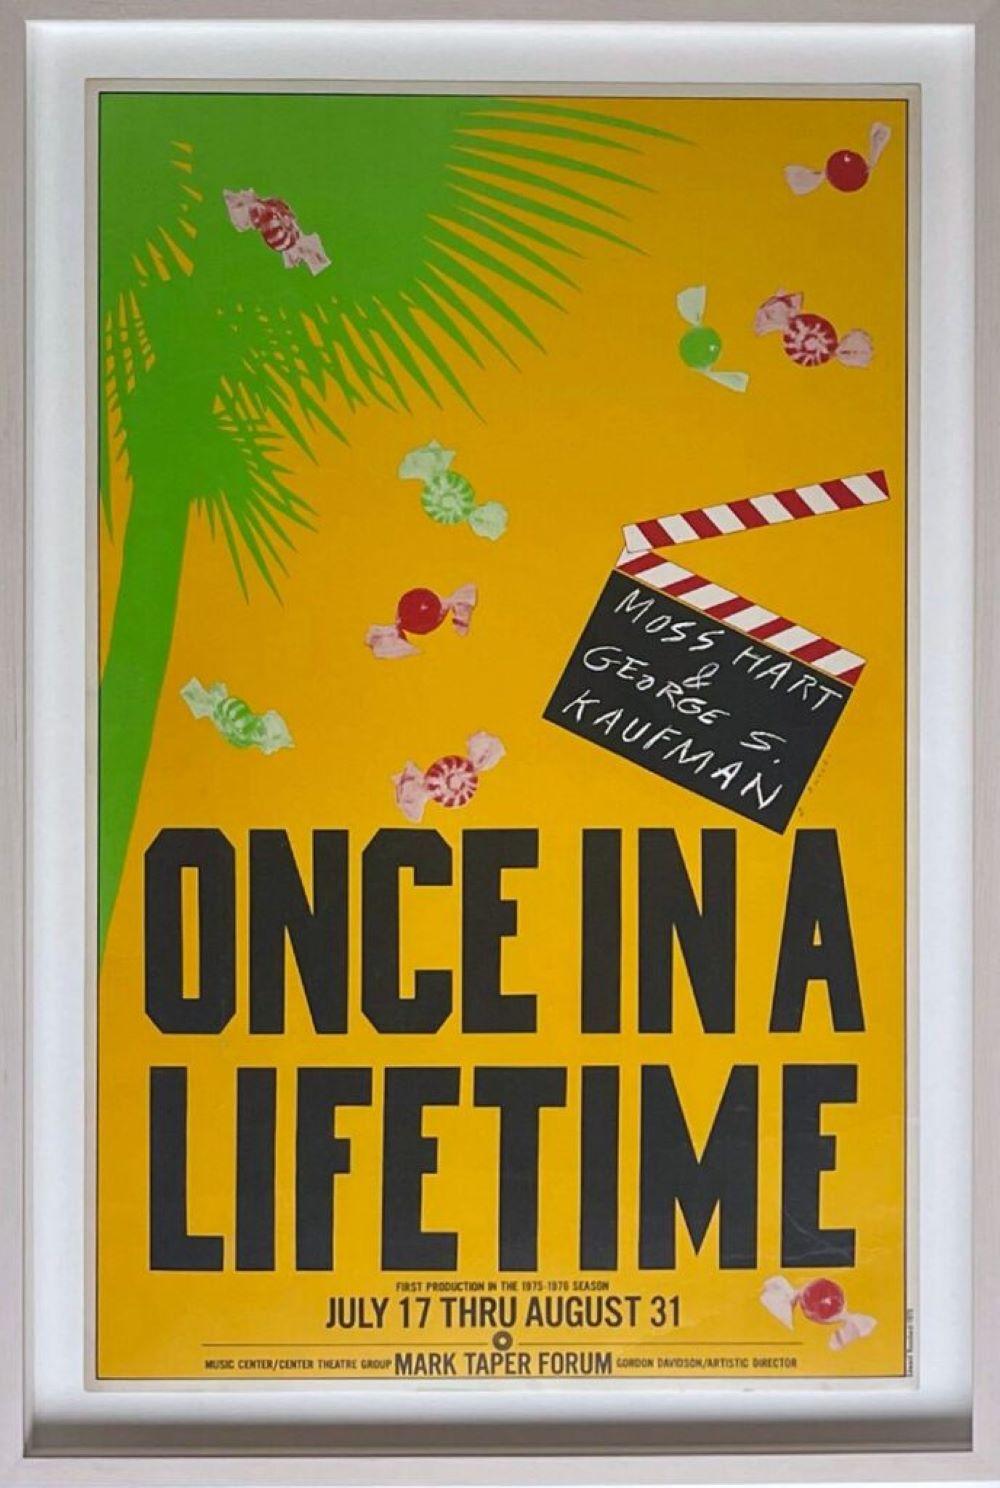 Once in a Lifetime (rare theatrical poster from mid 1970s designed by Ed Ruscha)